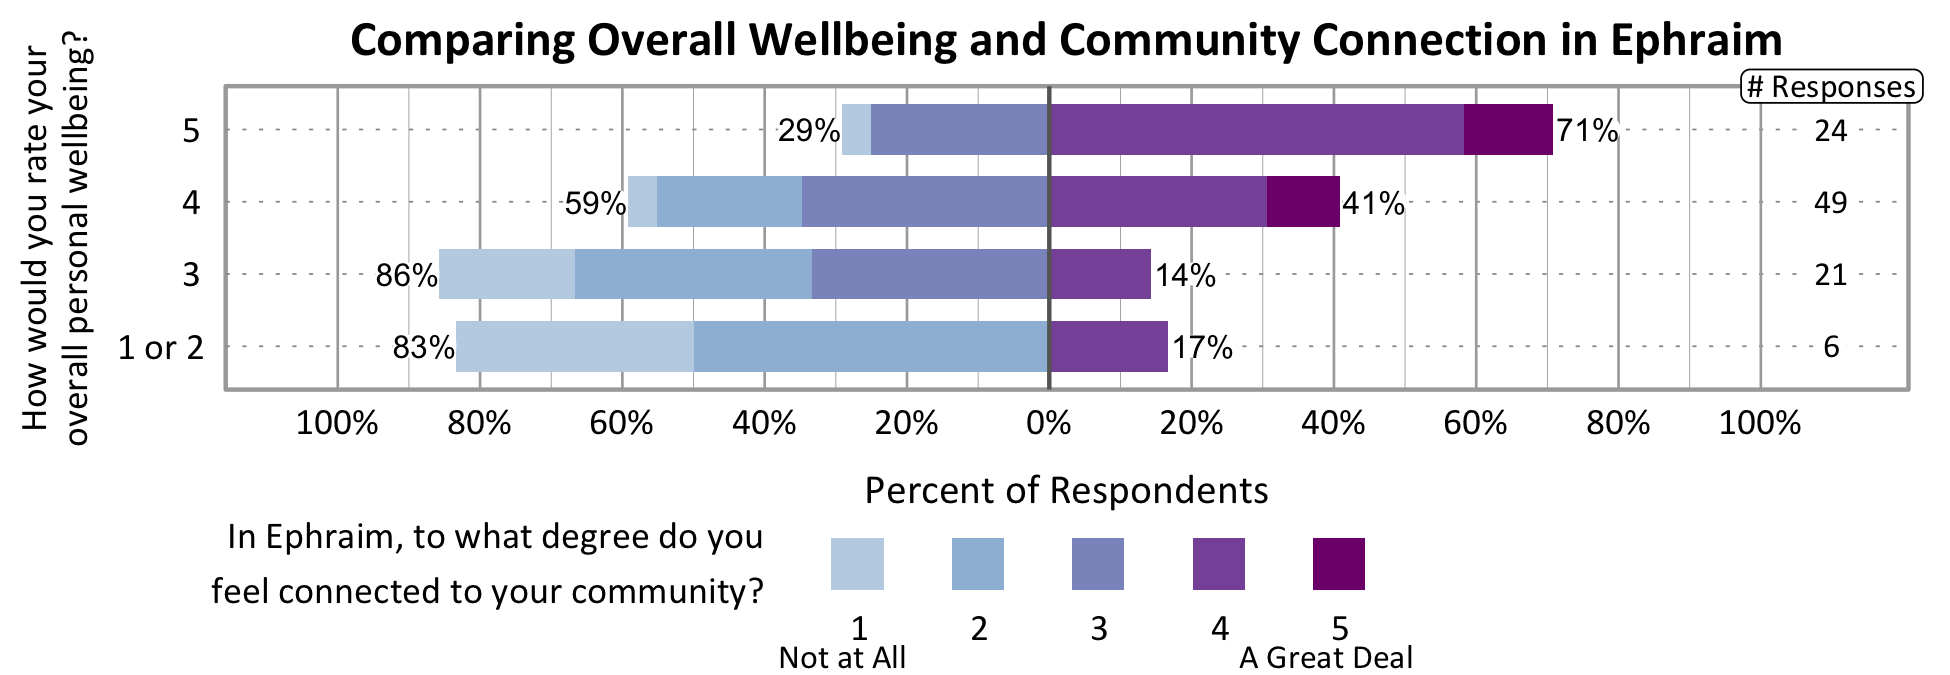 Likert Graph. Title: Comparing Overall Wellbeing and Community Connection in Ephraim. Of the 6 respondents that rate their overall personal wellbeing as a 1 or 2, 83% indicate a community connection score of 1, 2, or 3 while 17% indicate a community connection score of 4 or 5. Of the 21 respondents that rate their overall personal wellbeing as a 3, 86% indicate a community connection score of 1, 2, or 3 while 14% indicate a community connection score of 4 or 5. Of the 49 respondents that rate their overall personal wellbeing as a 4, 59% indicate a community connection score of 1, 2, or 3 while 41% indicate a community connection score of 4 or 5. Of the 24 participants that rate their overall wellbeing as a 5, 29% indicate a community connection score of 1, 2, or 3 while 71% indicate a community connection score of 4 or 5.